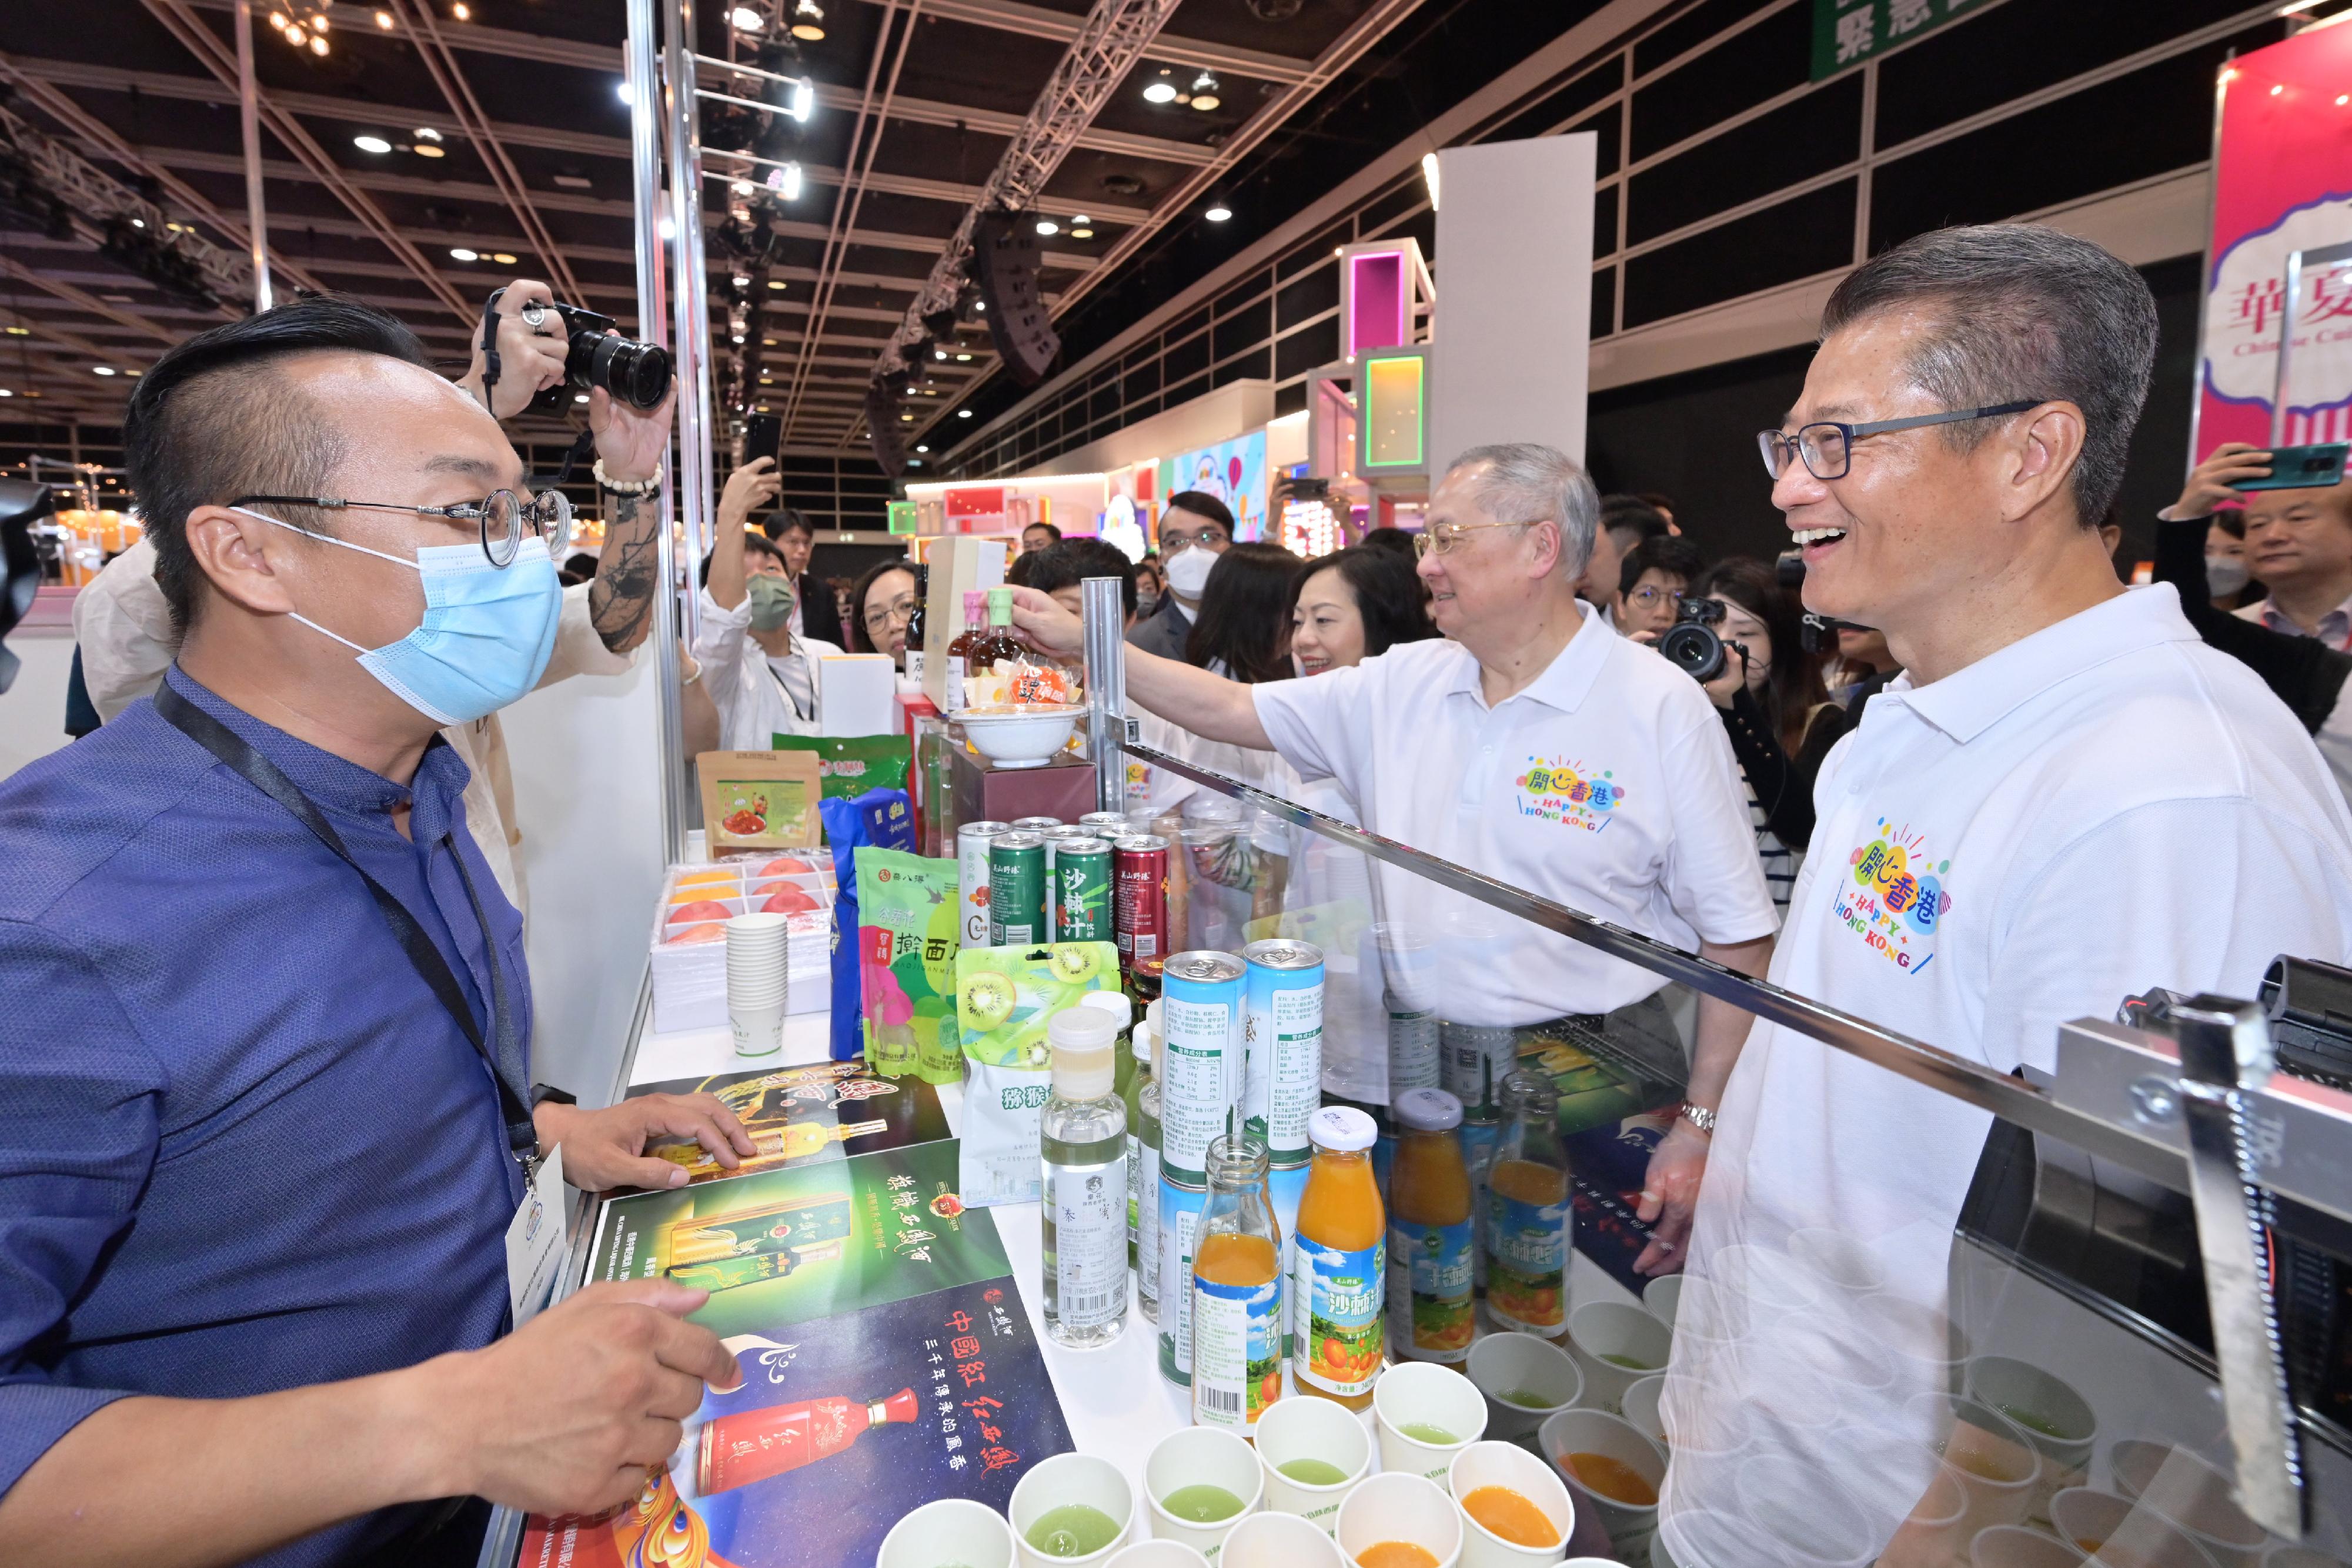 The Financial Secretary, Mr Paul Chan, officiated at the opening ceremony of the first "Happy Hong Kong" Gourmet Marketplace today (April 29). Photo shows Mr Chan (first right), accompanied by Non-official Member of the Executive Council, Legislative Council Member (Catering), Mr Tommy Cheung (second right); and the Secretary for Home and Youth Affairs, Miss Alice Mak (third right), exchanging views with exhibitor.